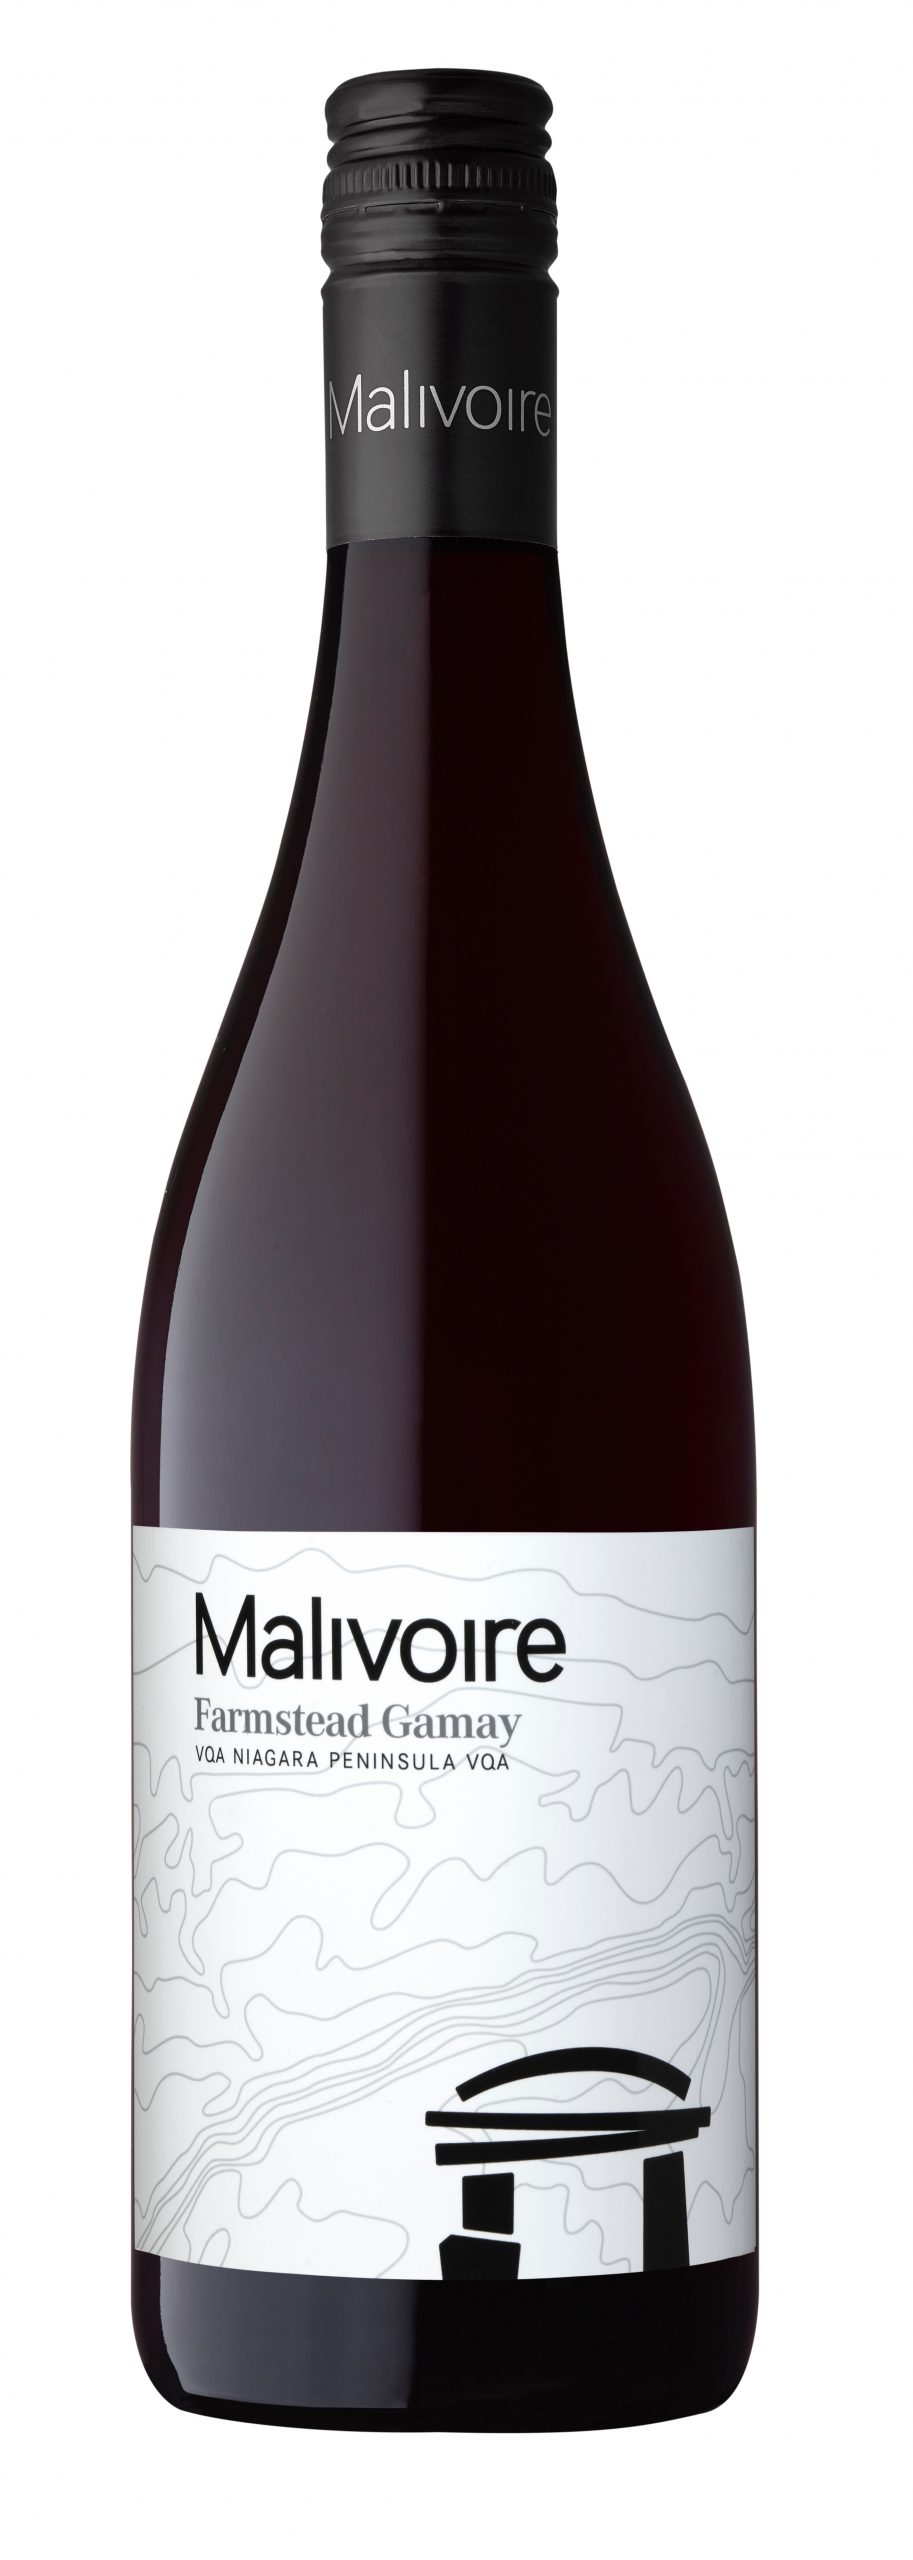 A product image for Malivoire Gamay